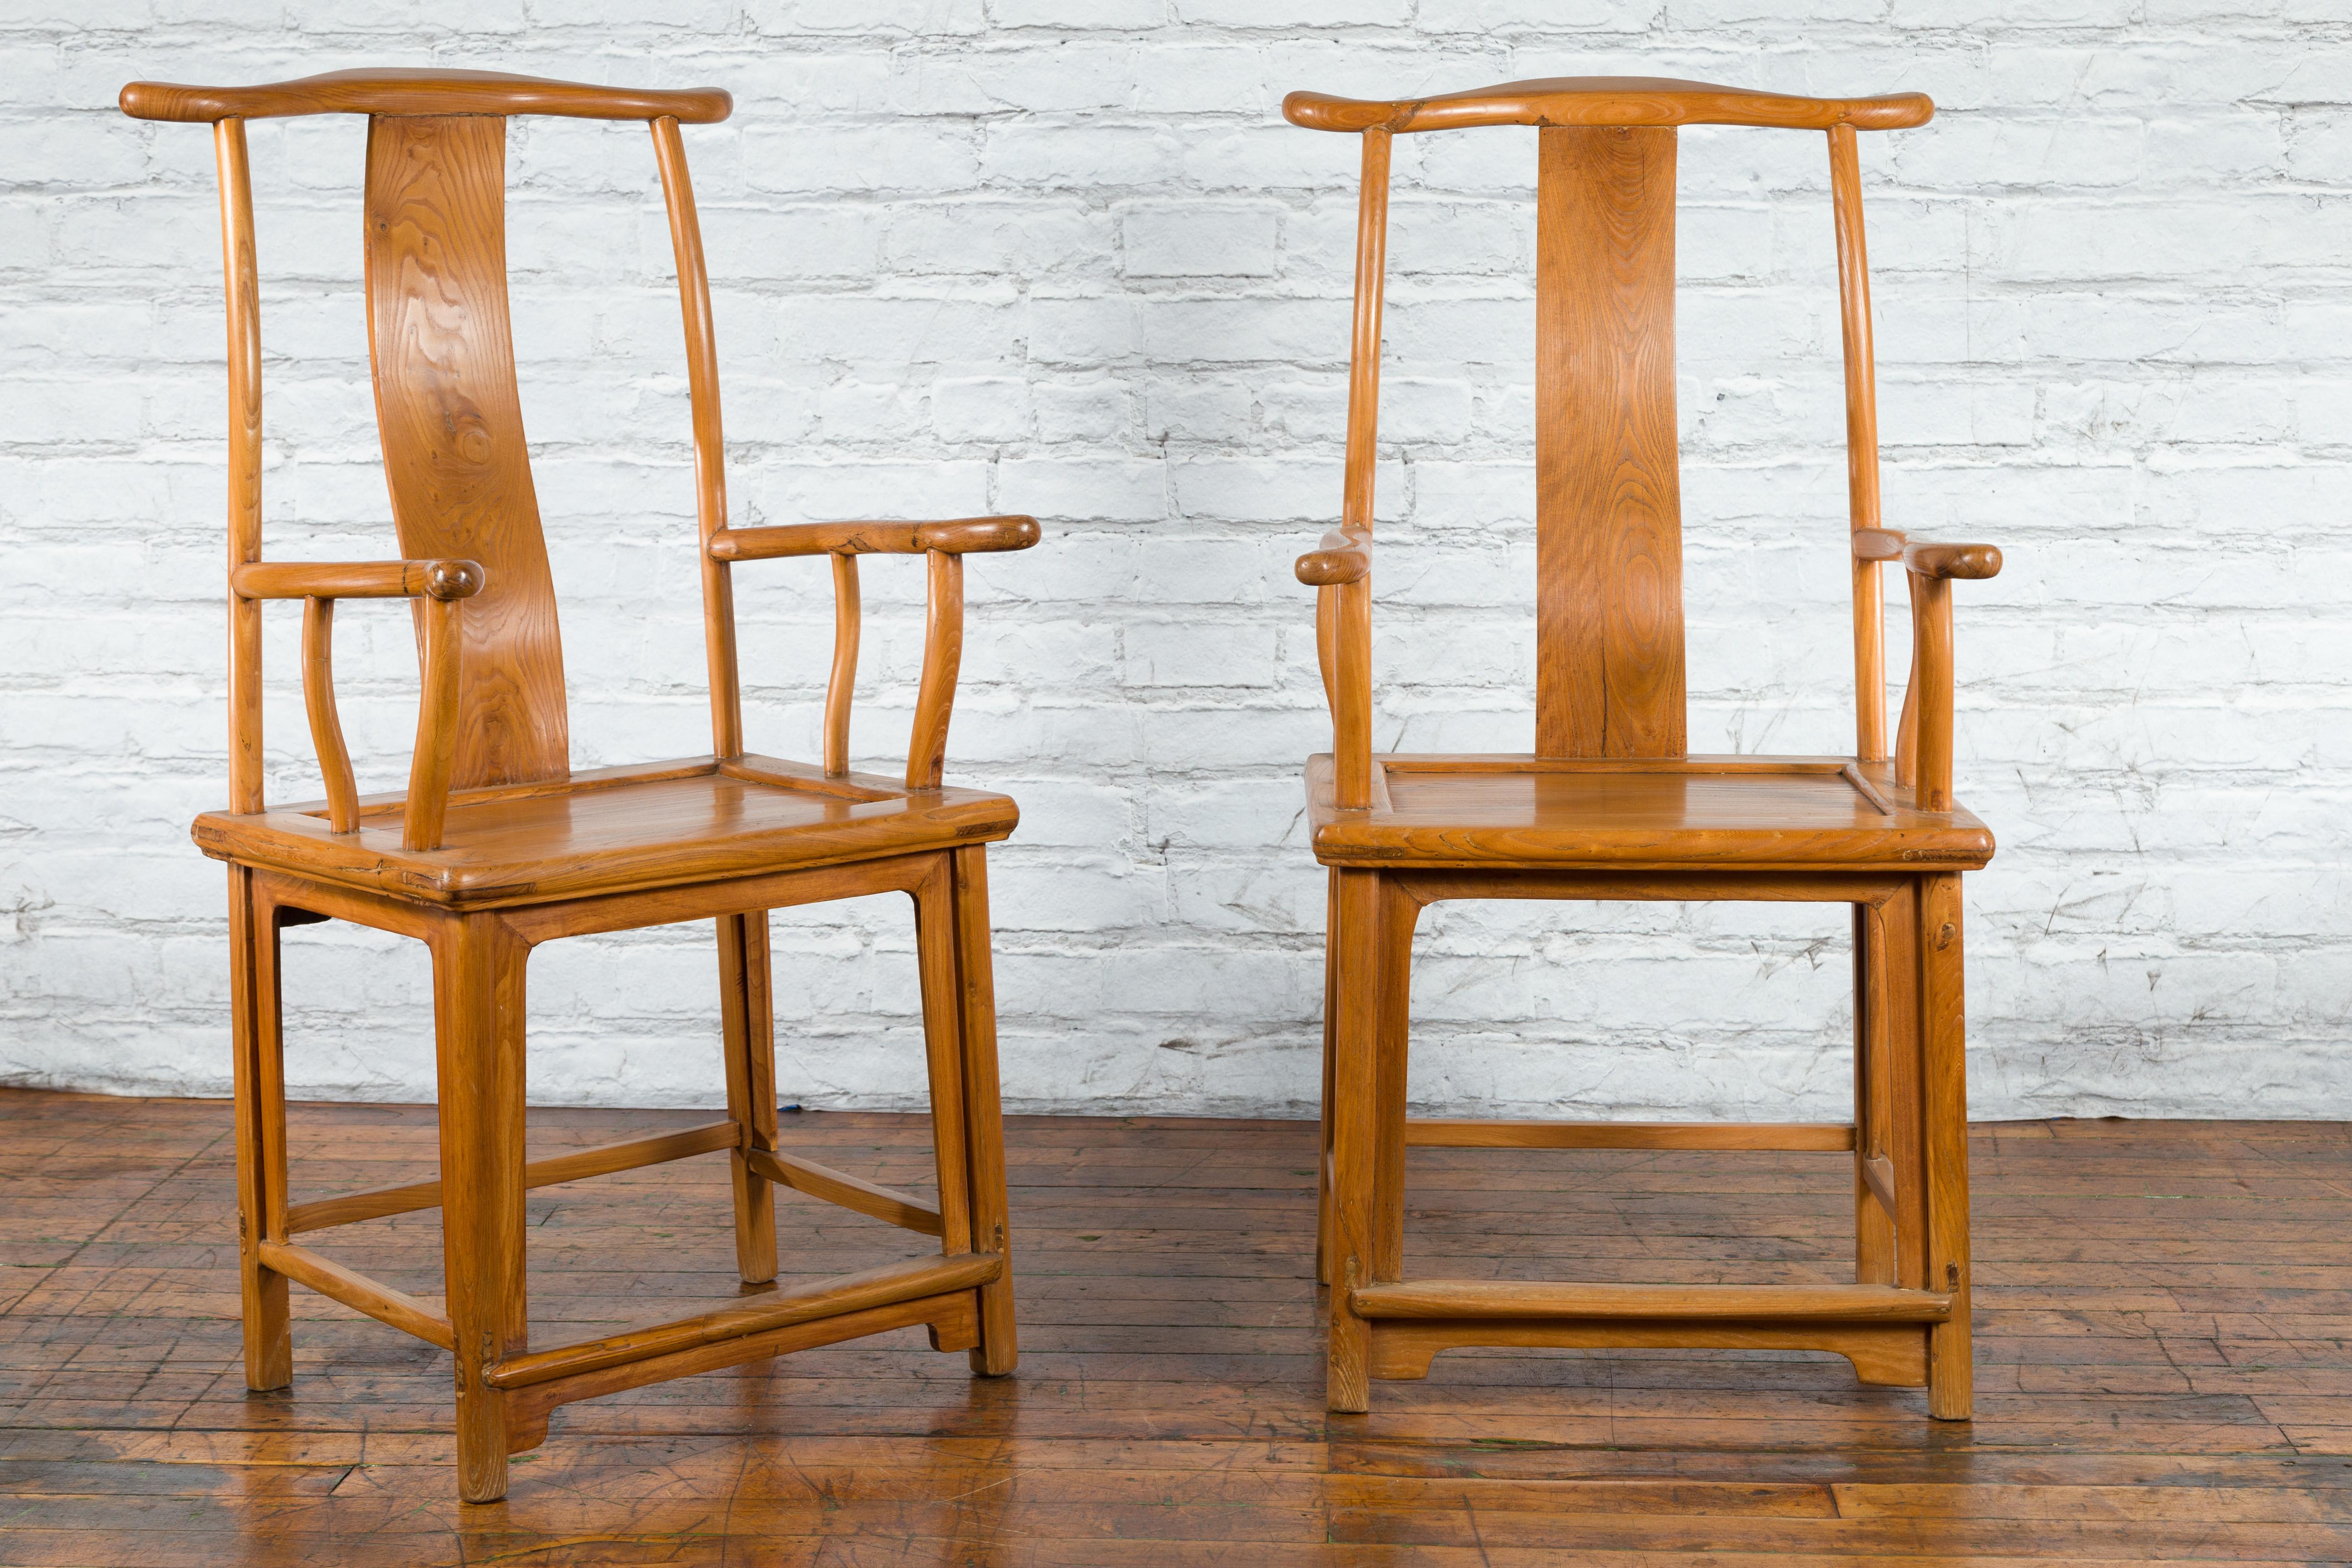 A pair of Chinese Qing Dynasty period lamp hanger armchairs from the 19th century with serpentine arms, wooden seats and natural honey patina. Created in China during the Qing Dynasty period, each of this pair of armchairs features a rectangular